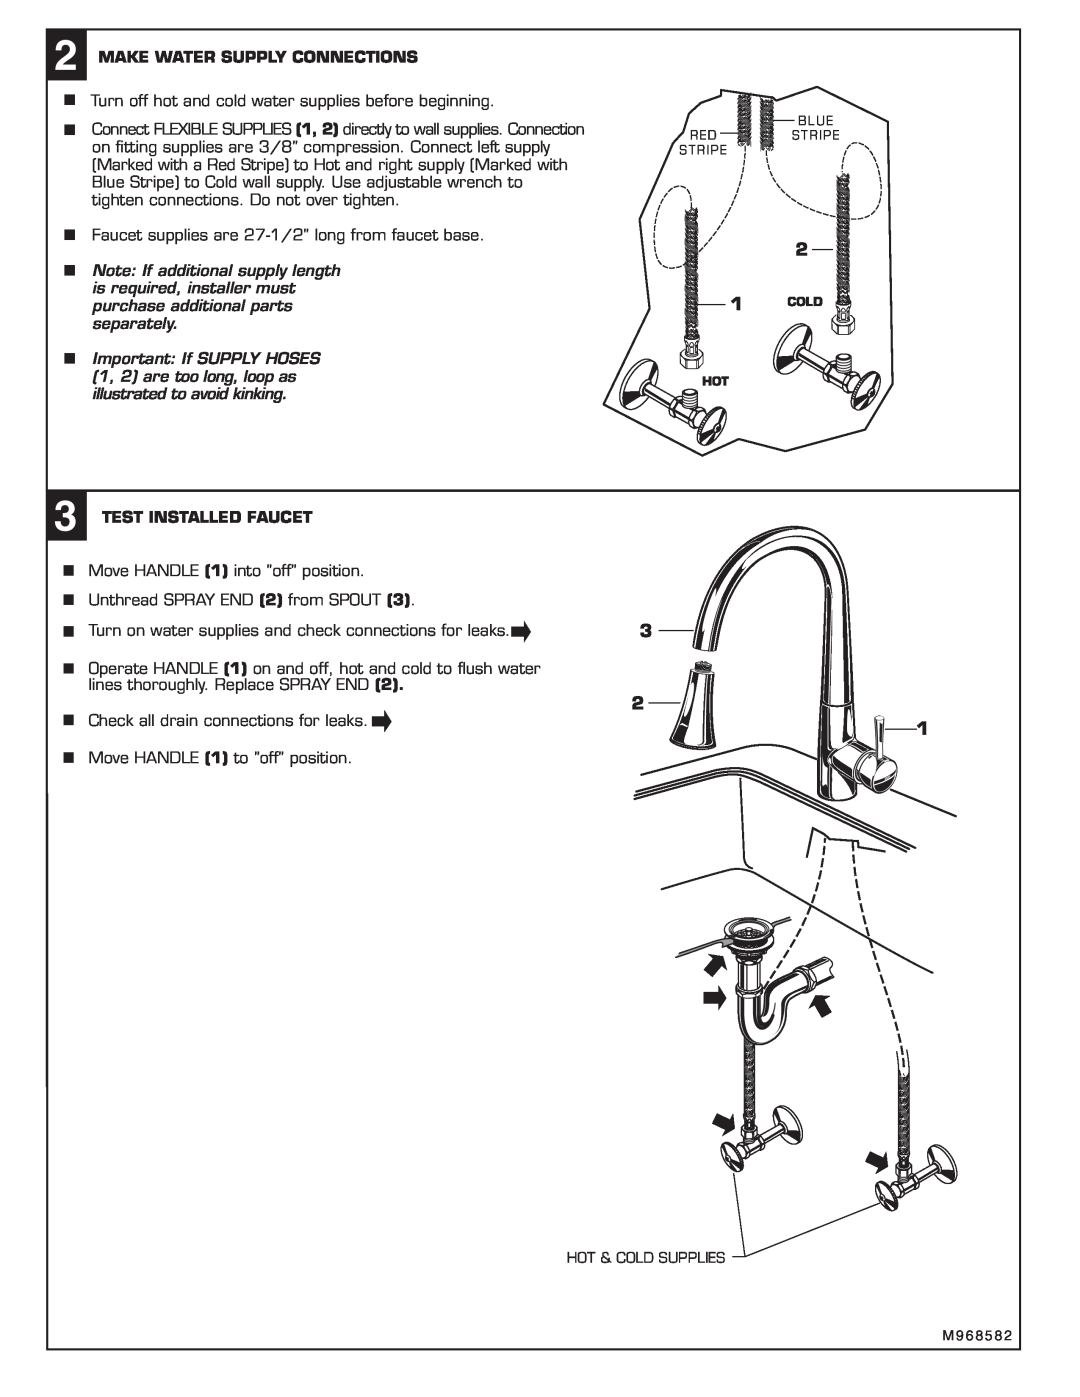 American Standard 4335.020.XXX Make Water Supply Connections, purchase additional parts1 COLD separately 